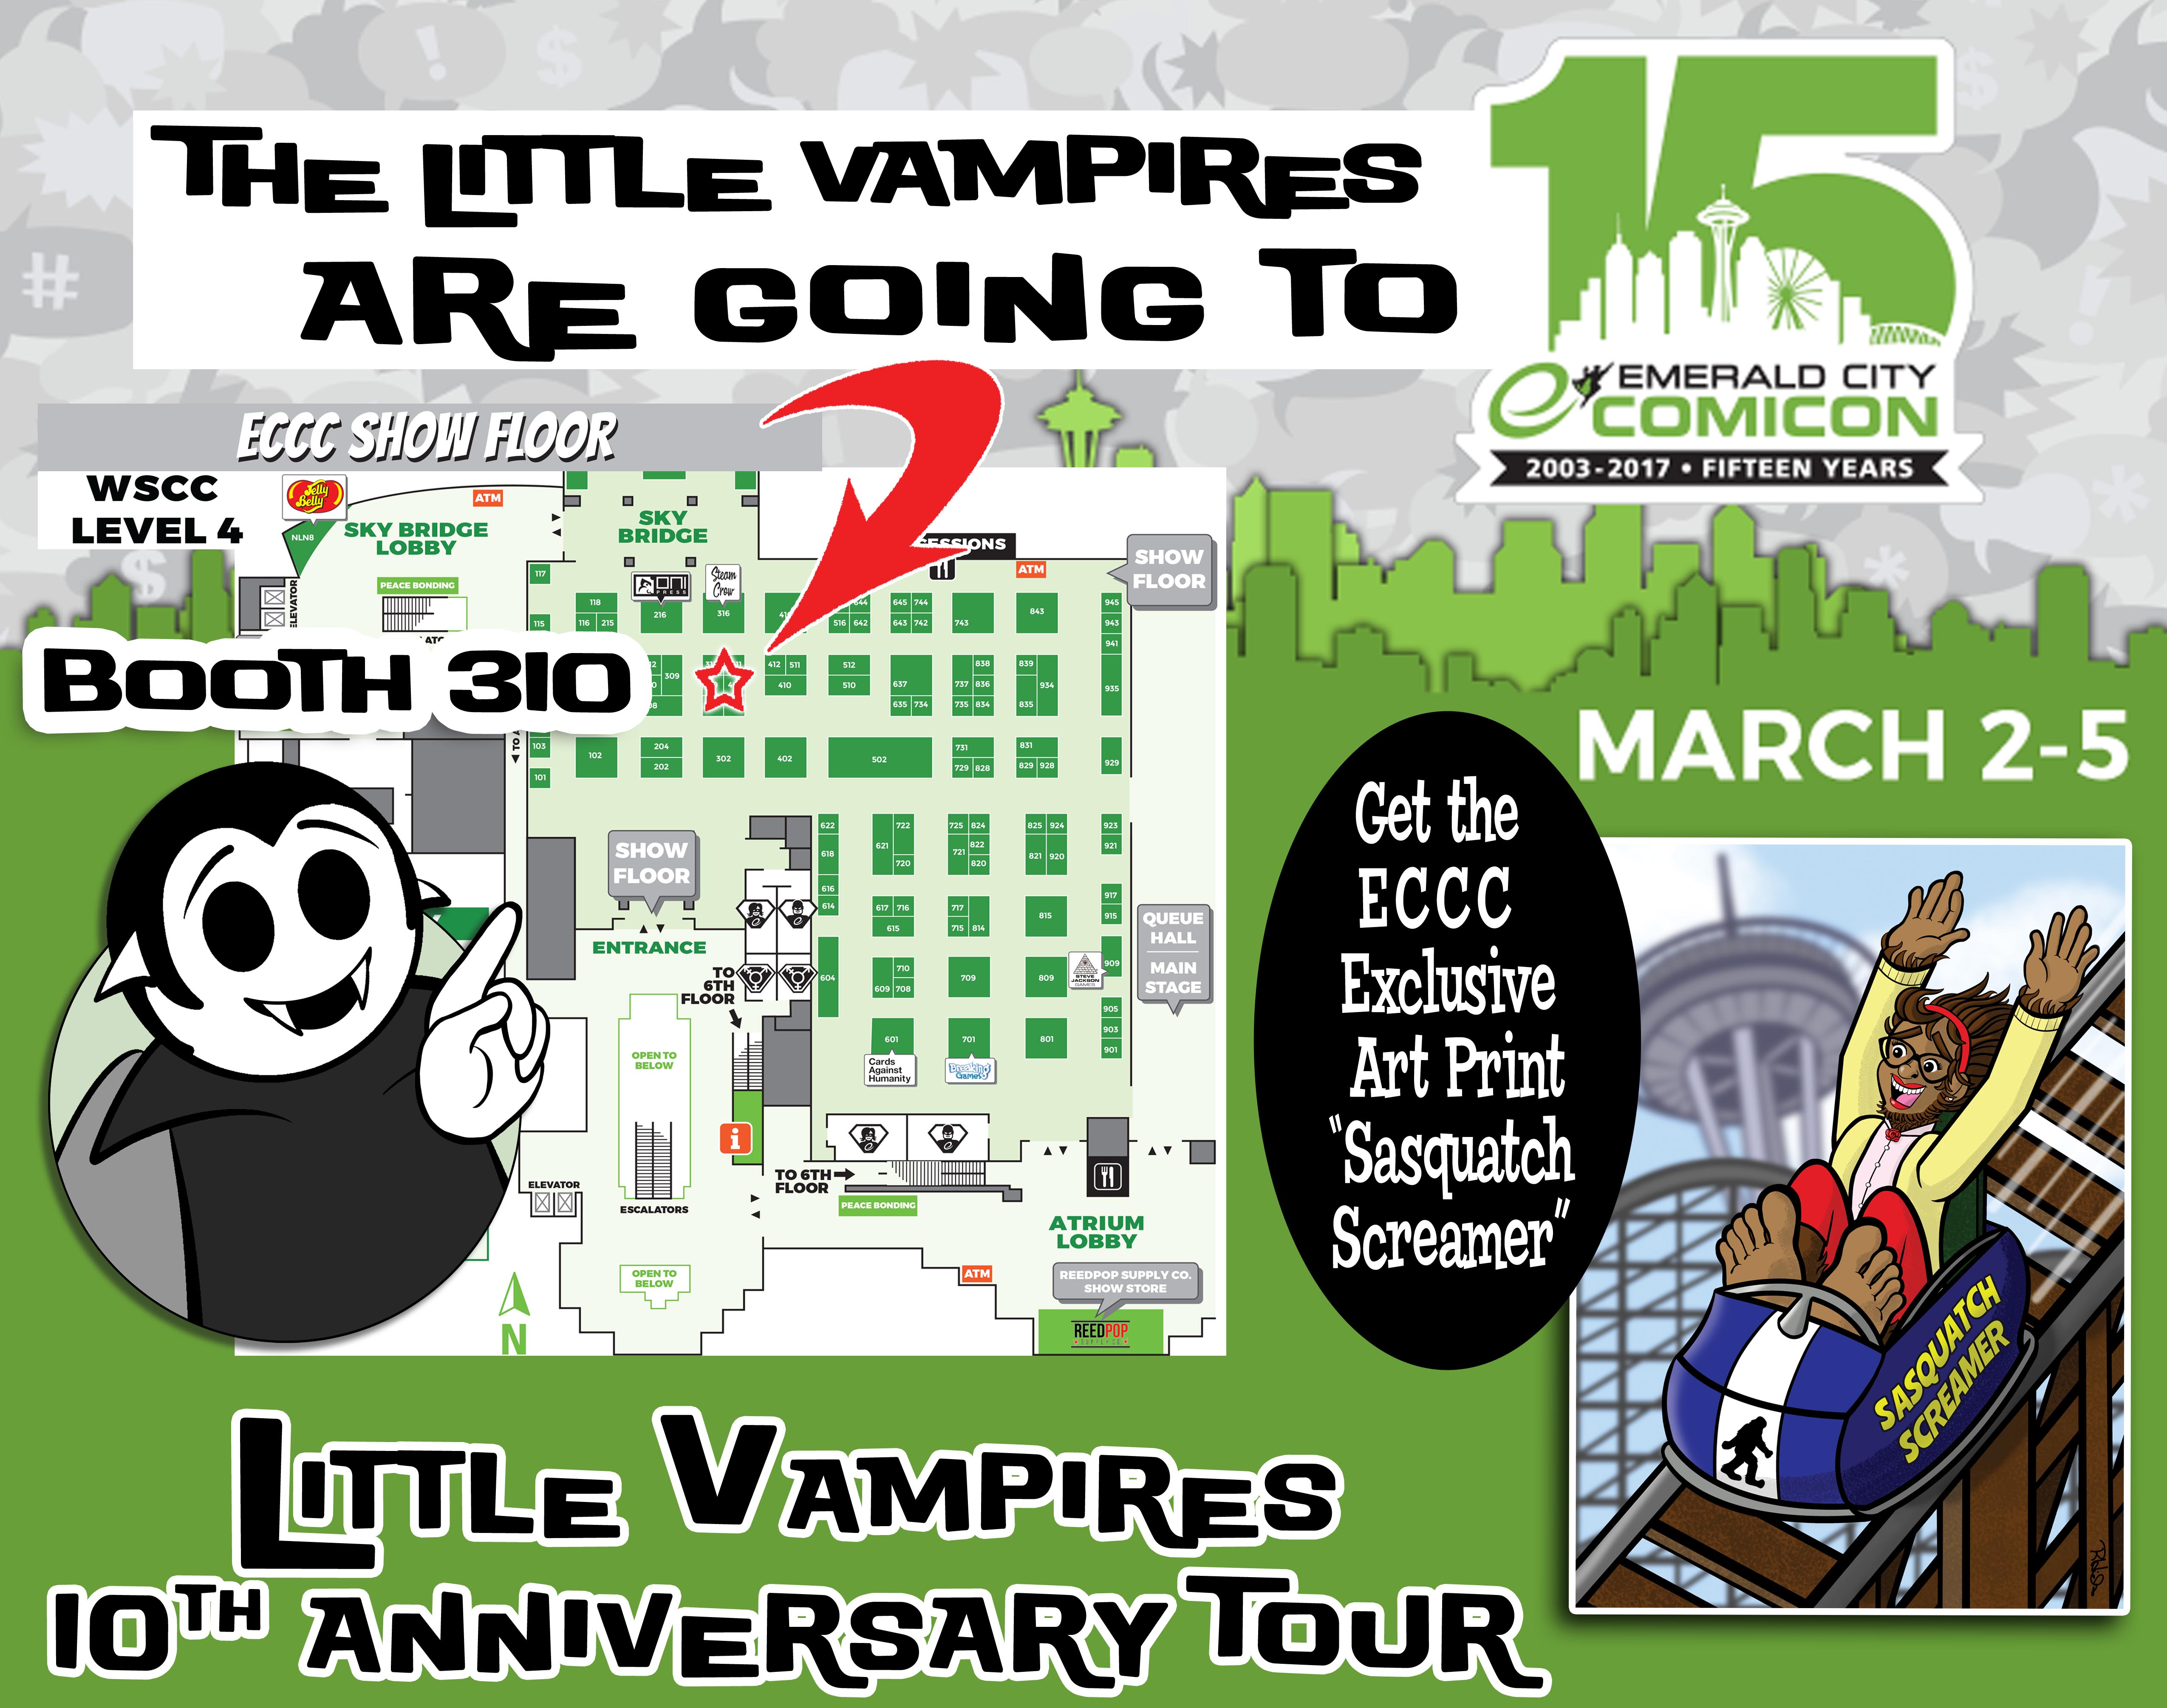 Emerald City Comicon 2017 Exhibitor floor map with the Little Vampires booth highlighted